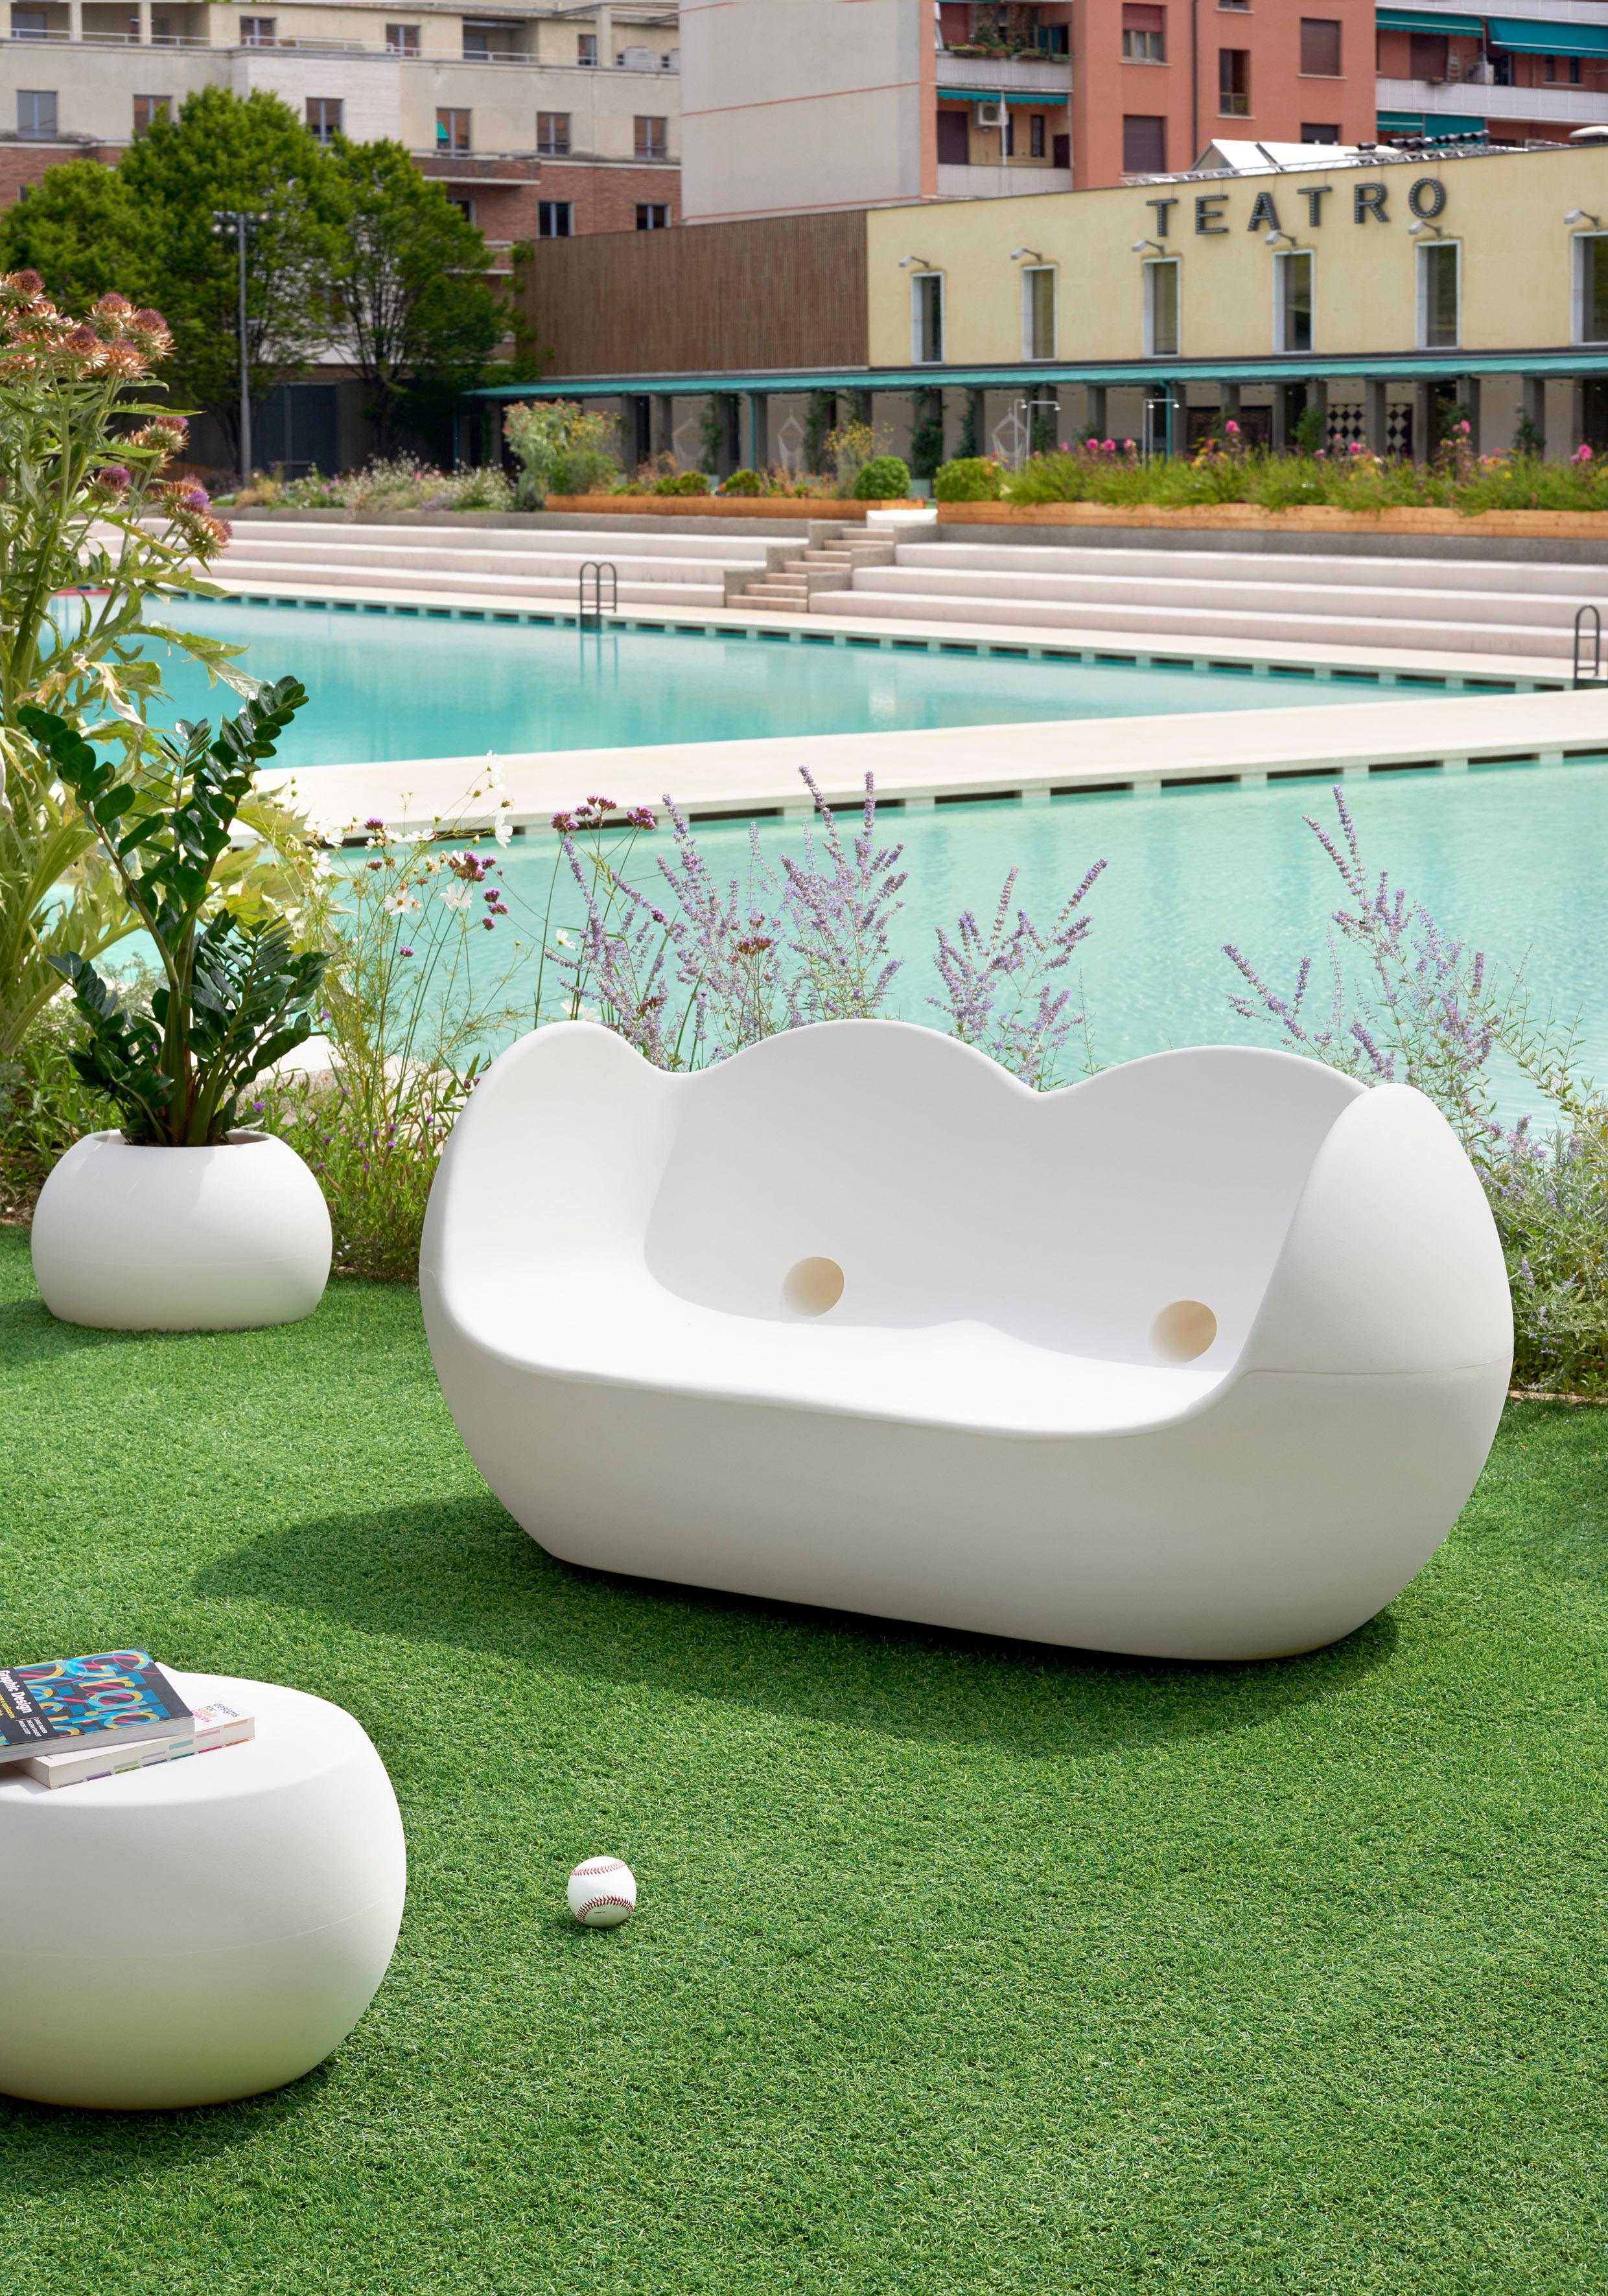 Elephant Grey Blossy Rocking Sofa by Karim Rashid
Dimensions: D 85 x W 159 x H 75 cm. Seat Height: 34 cm.
Materials: Polyethylene.
Weight: 38 kg.

Available in different color options. This product is suitable for indoor and outdoor use. Please